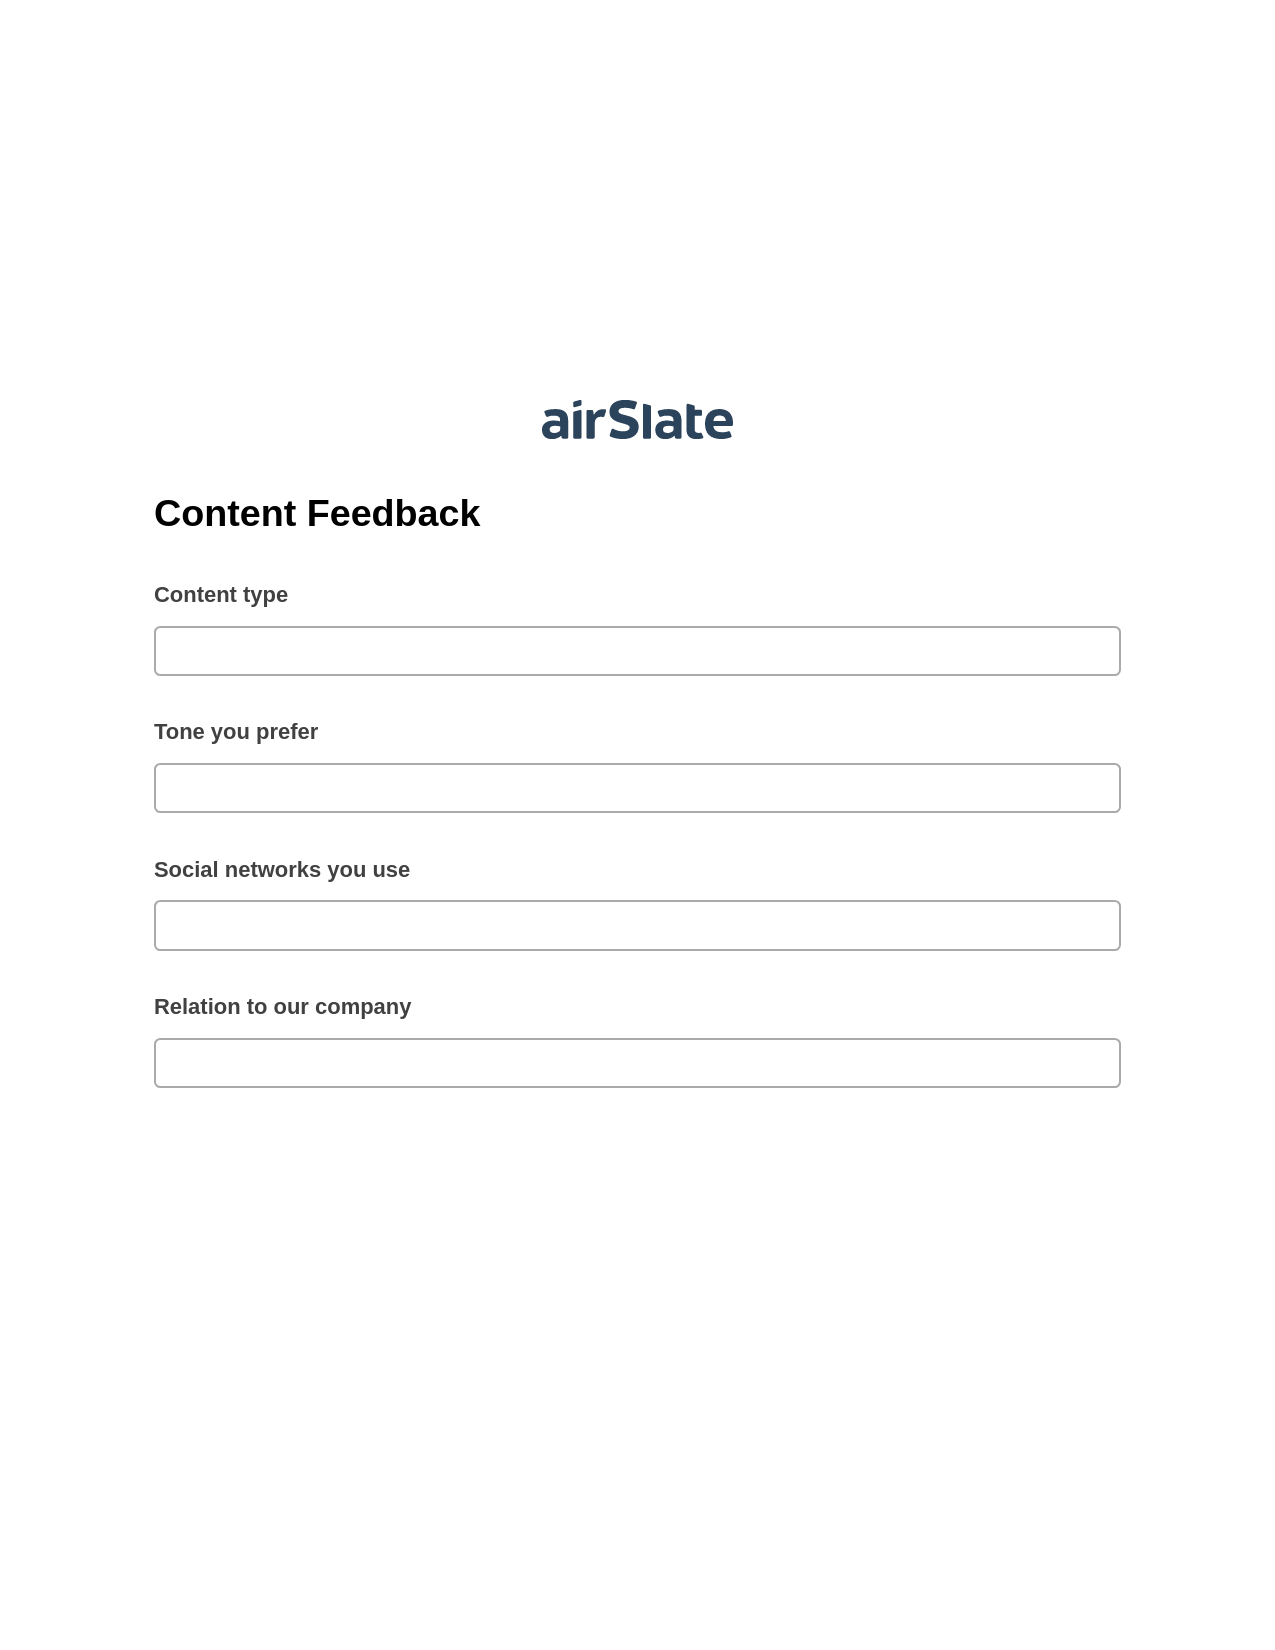 Content Feedback Pre-fill Slate from MS Dynamics 365 Records Bot, Update Salesforce Record Bot, Archive to SharePoint Folder Bot